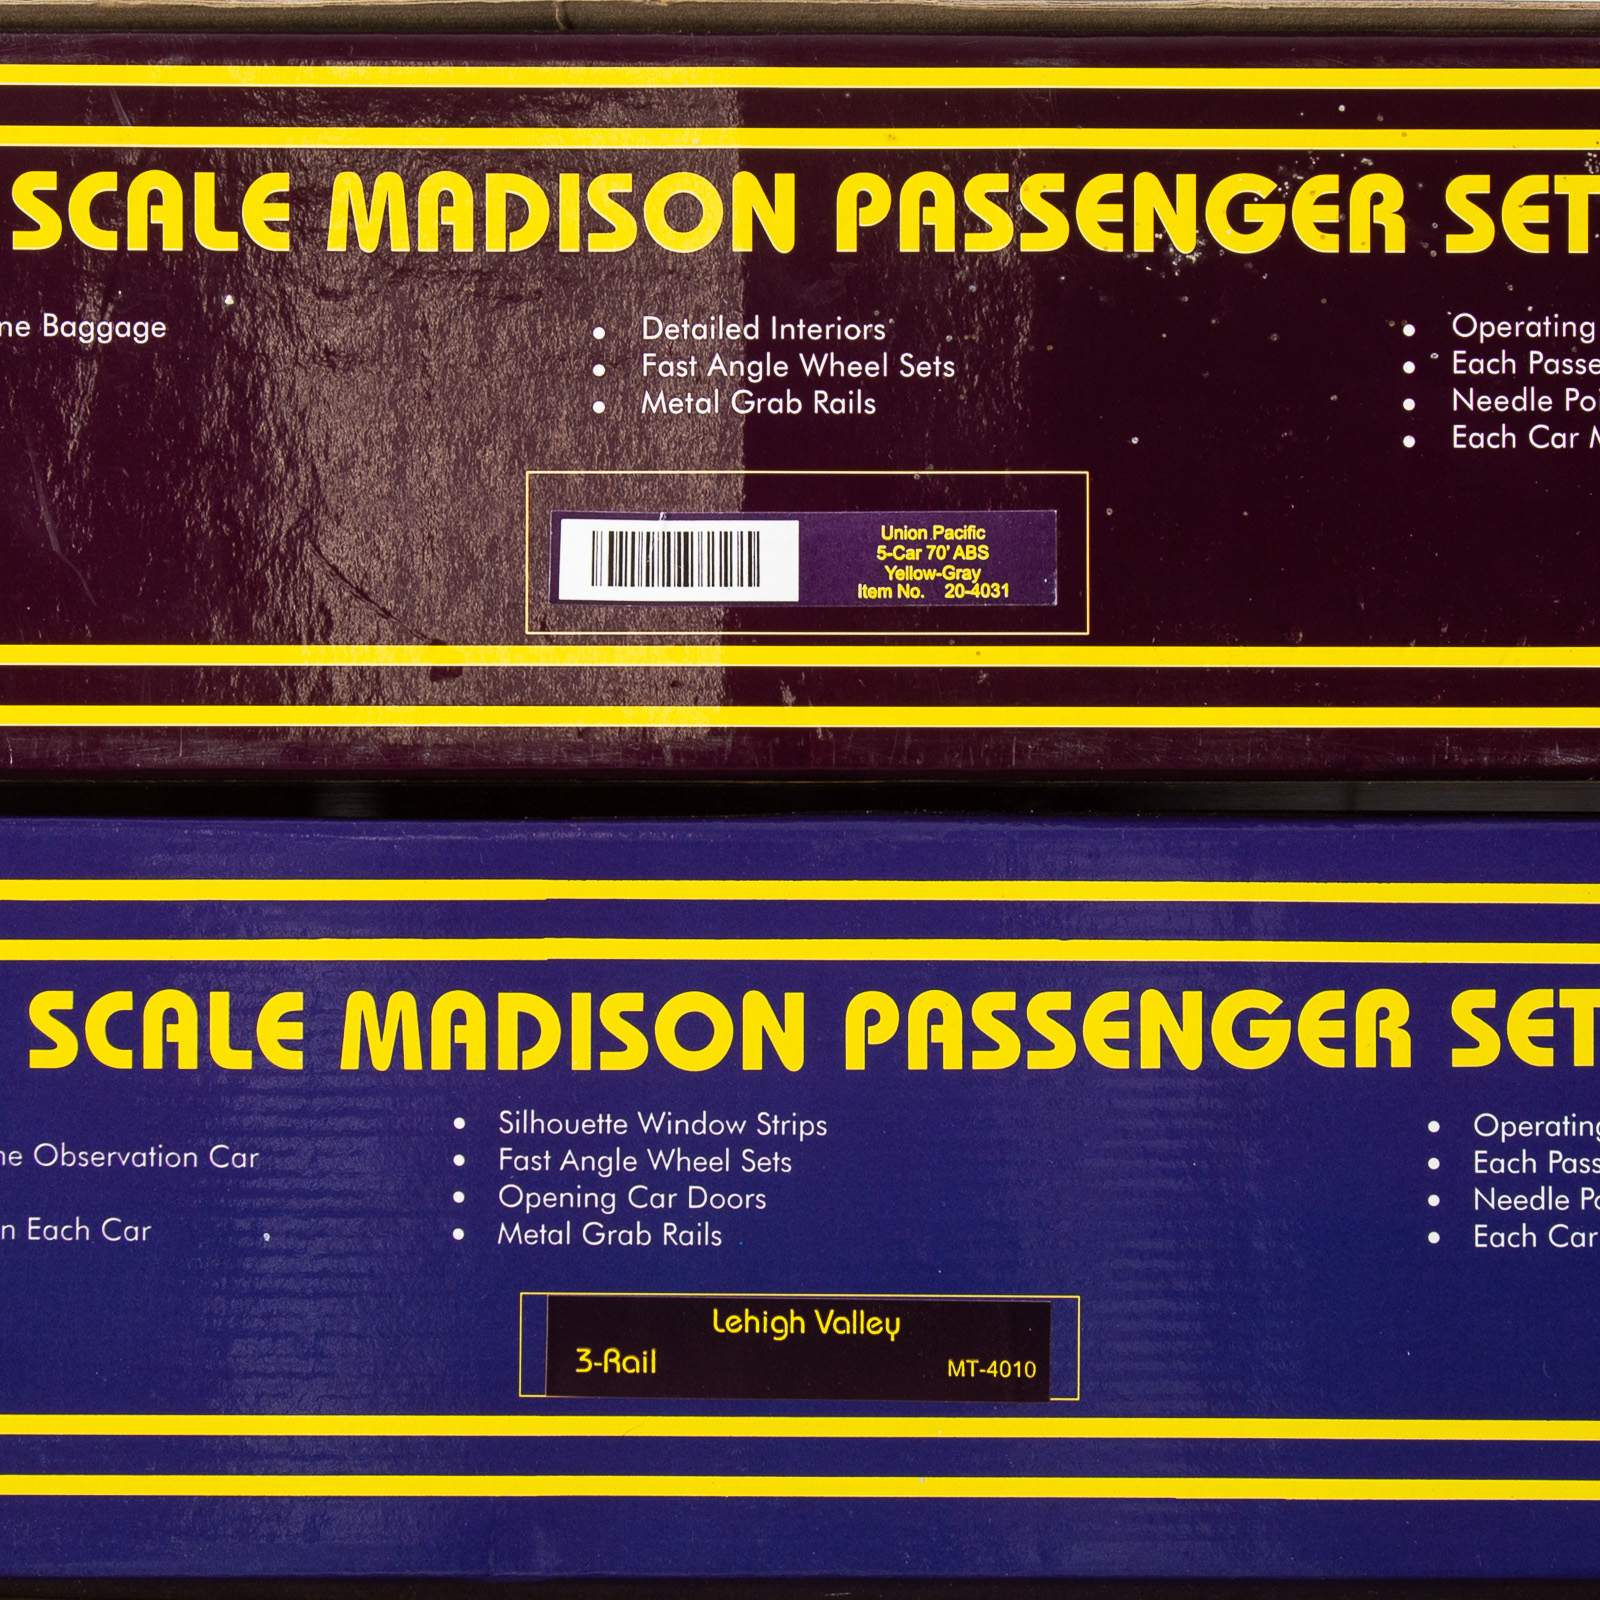 TWO M T H SCALE MADISON PASSENGER 36a08d